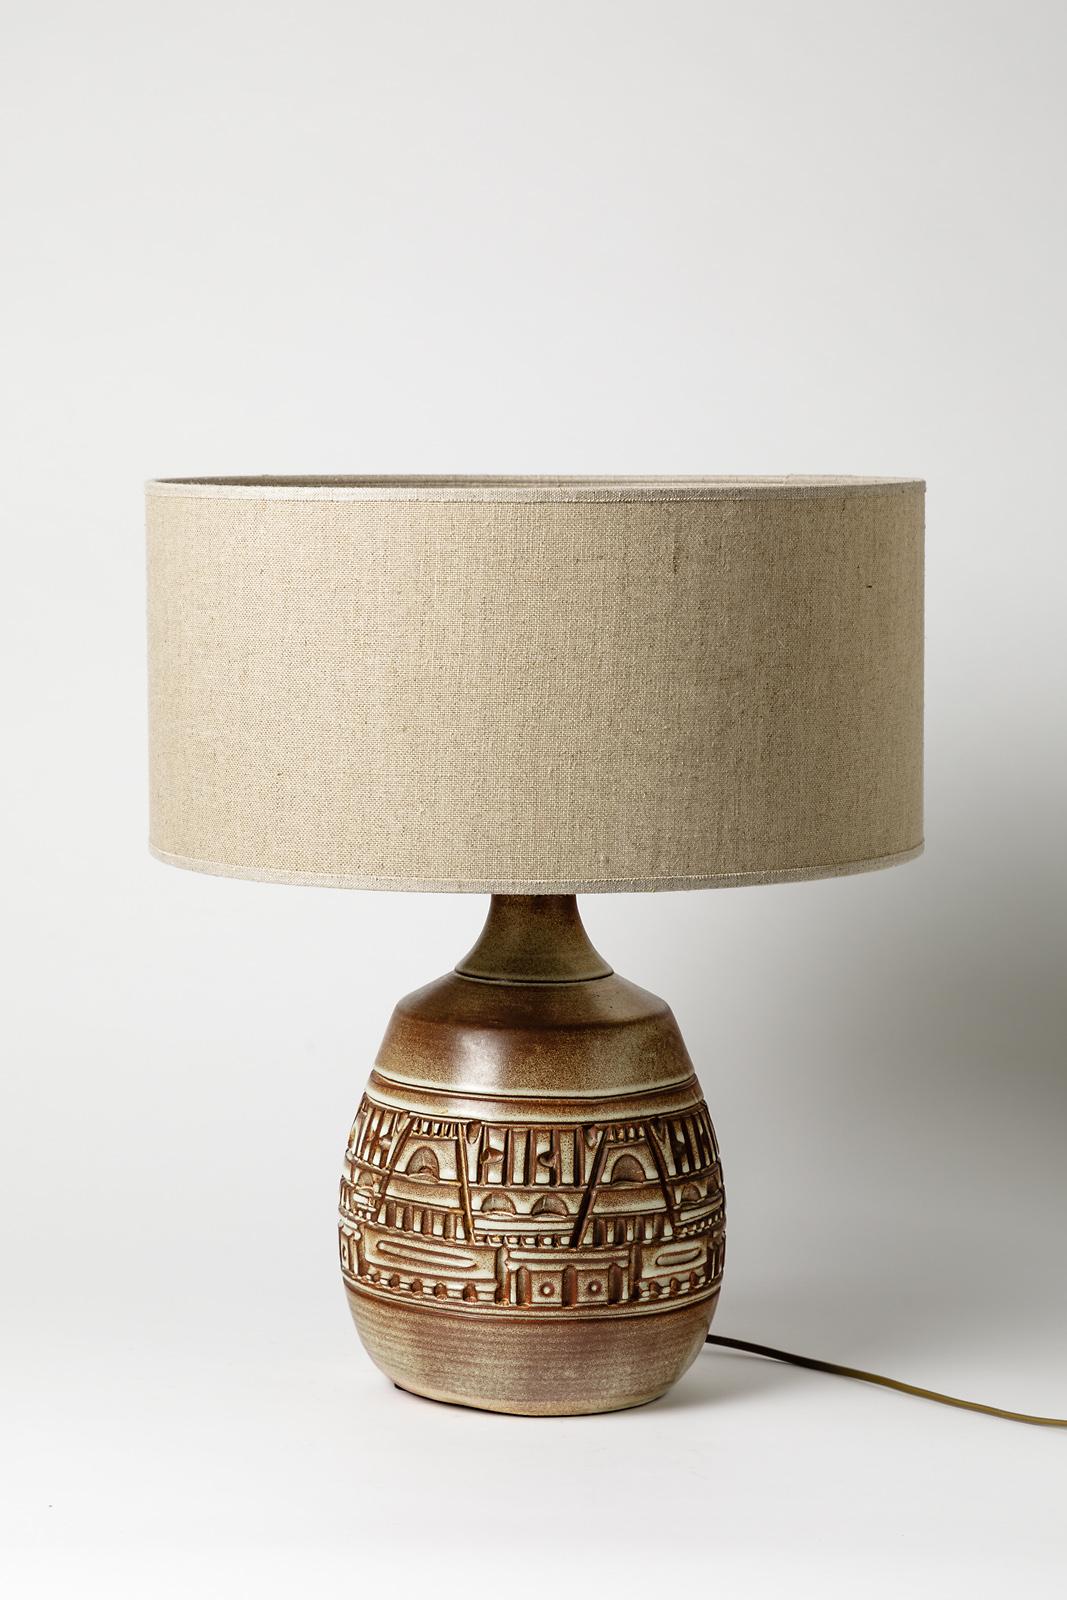 Brown Stoneware Geometric Decoration Ceramic Table Lamp by Bessone, 1970 In Excellent Condition For Sale In Neuilly-en- sancerre, FR